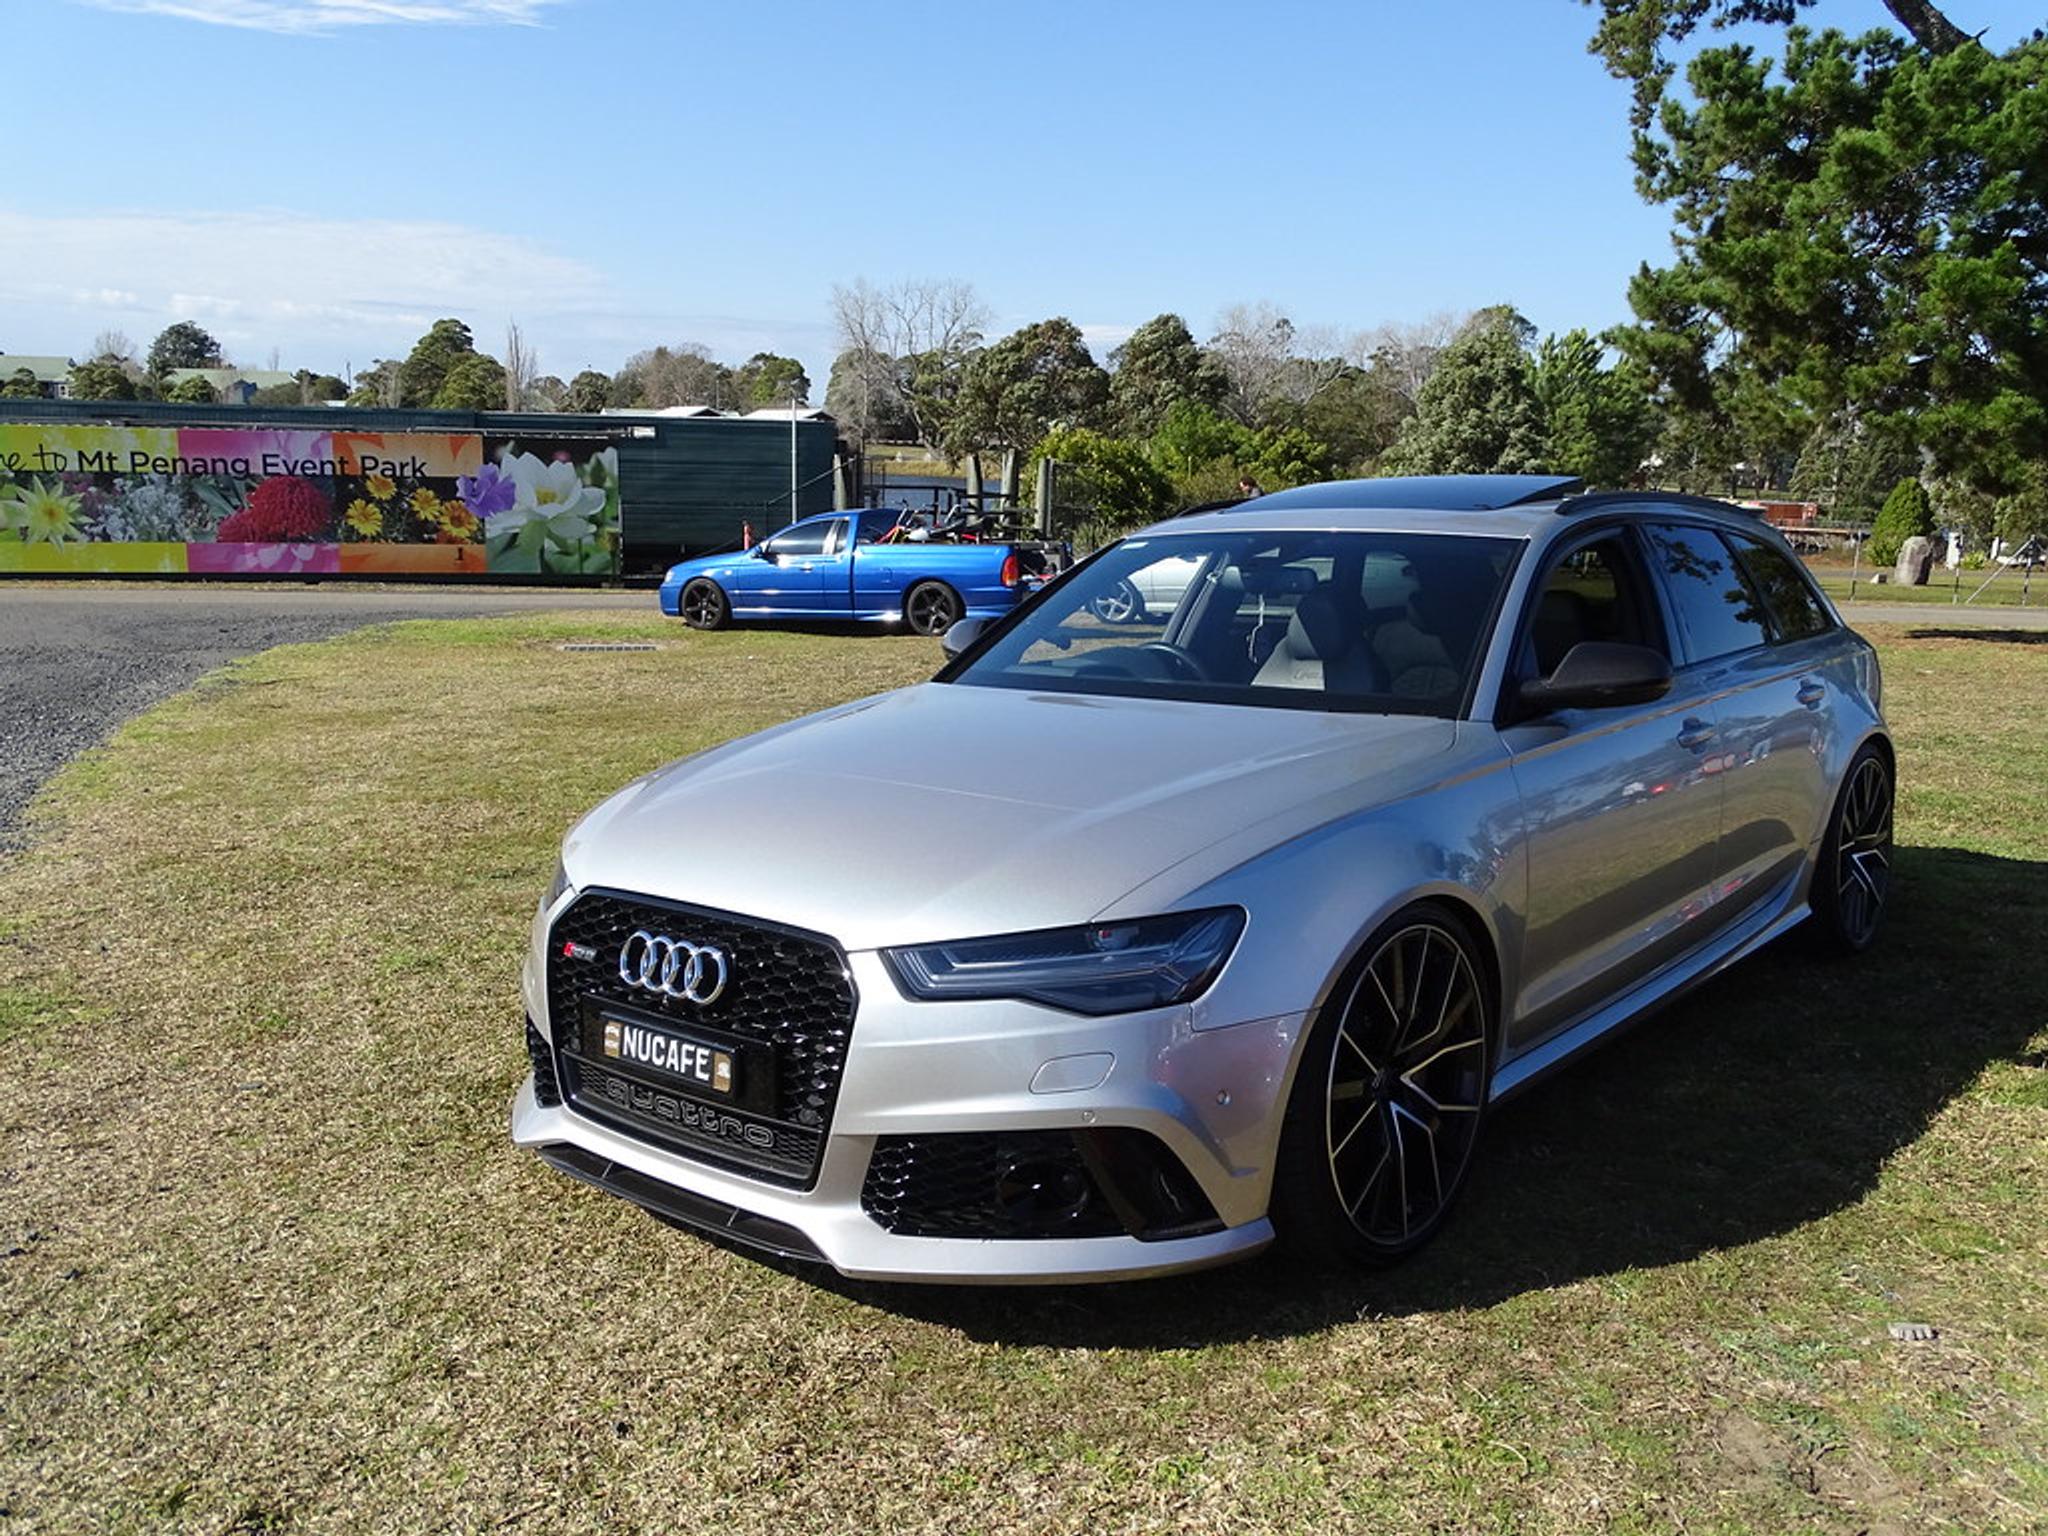 Silver Audi RS6 Avant on grass